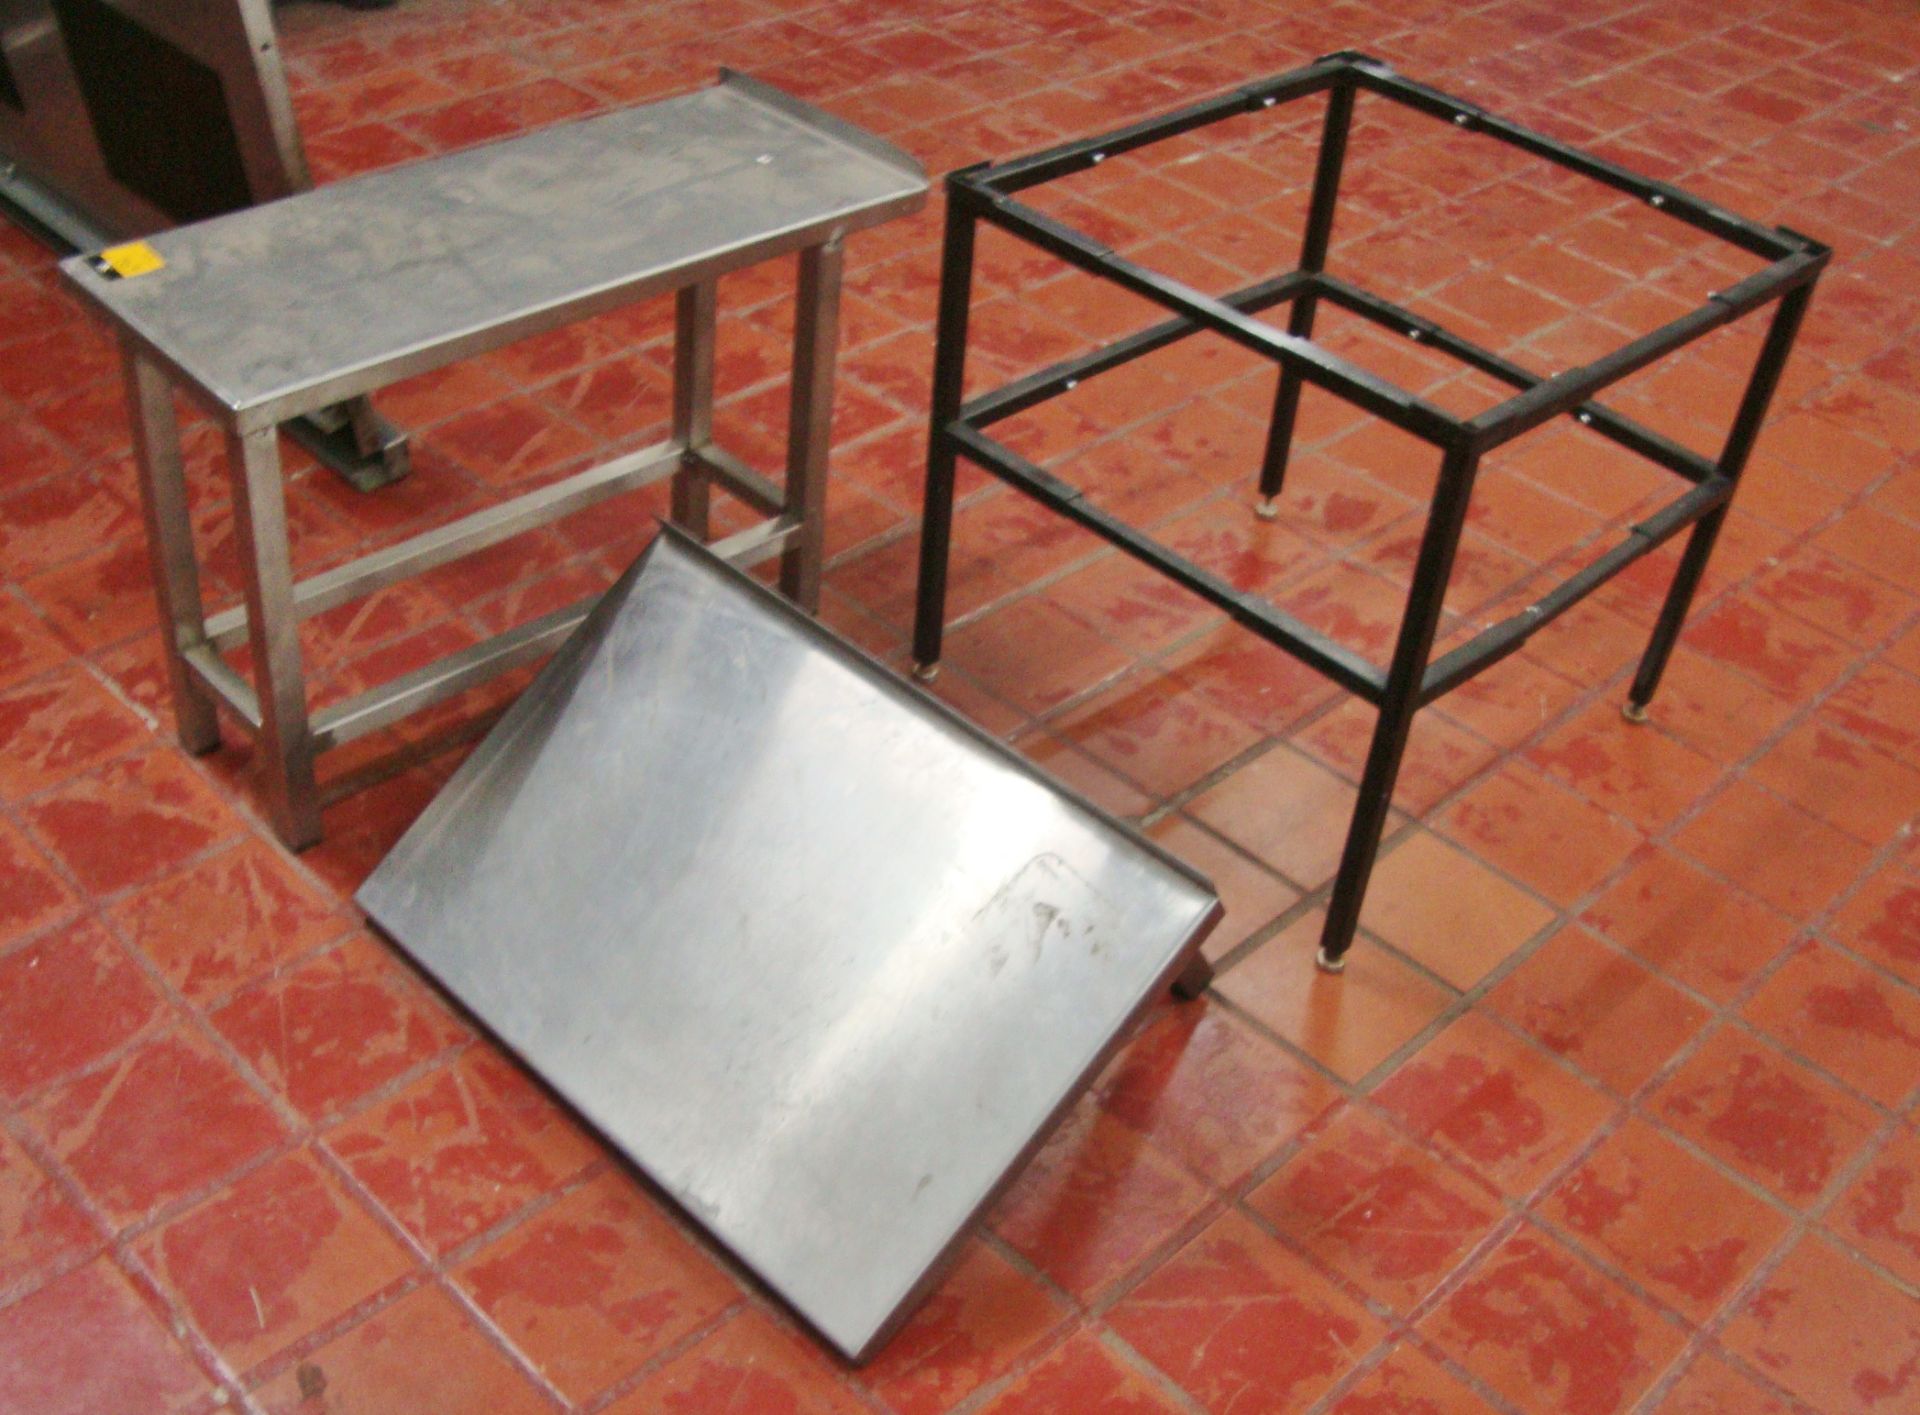 3 off assorted small metal tables and frames, one of which appears to be a freestanding table, the - Image 2 of 2